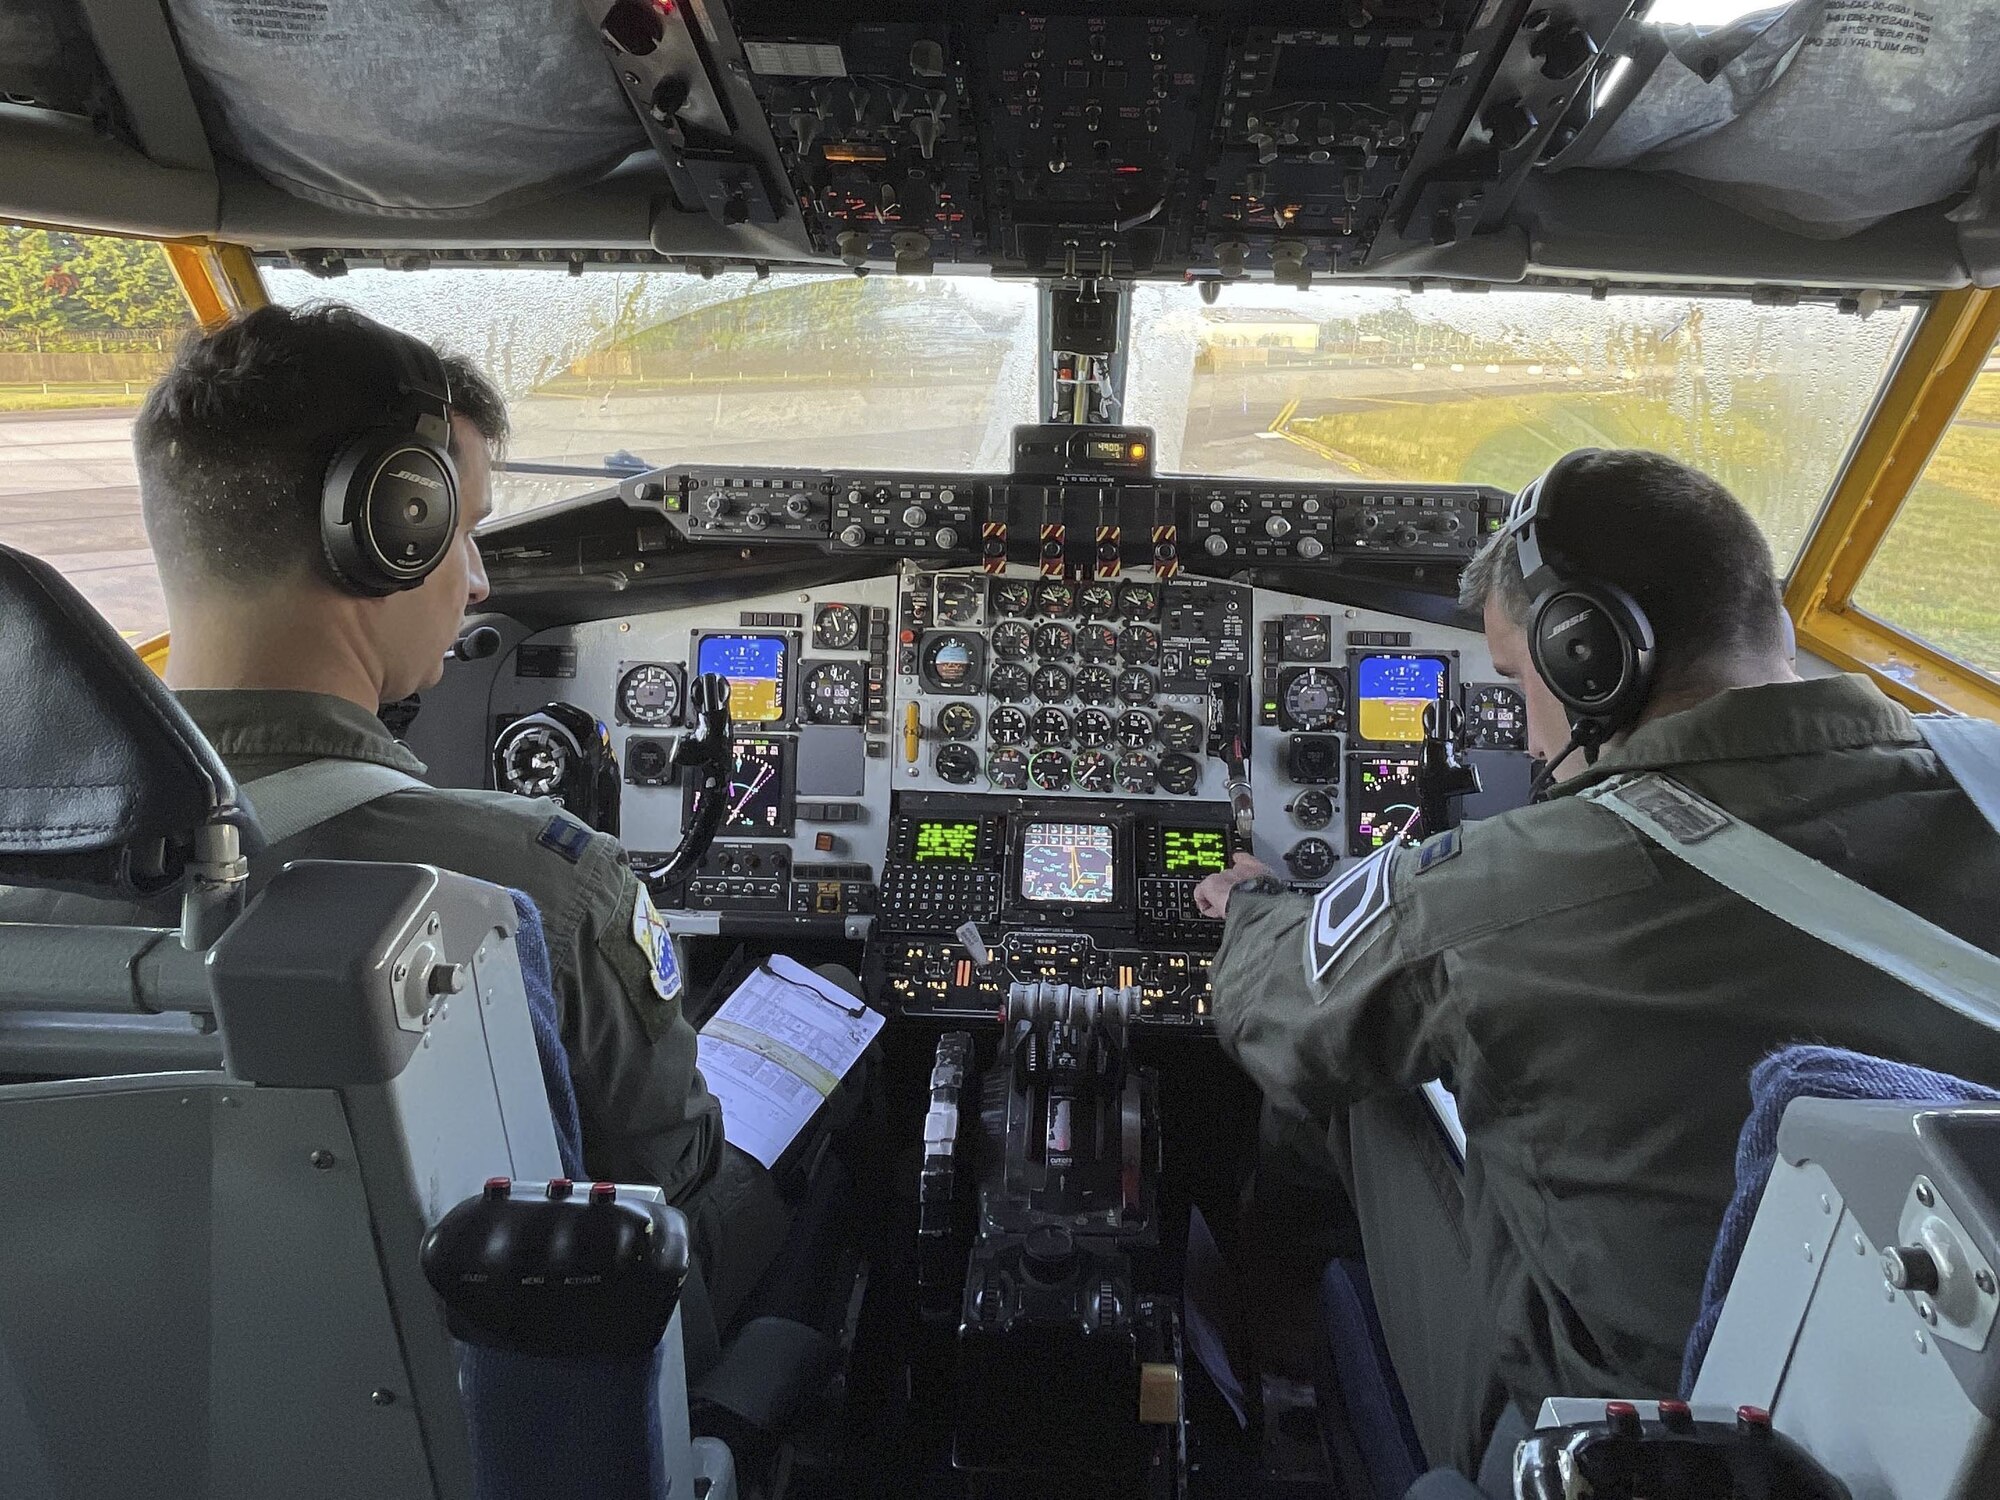 U.S. Air Force Capt. Aaron Bassut, 351st Air Refueling Squadron pilot, left, and Capt. Timmy Gaumer, 351st ARS pilot, conduct preflight checks before a mission at Royal Air Force Mildenhall, England, Aug. 24, 2021. The 100th Air Refueling Wing is the only permanent U.S. air refueling wing in the European theater, providing the critical air refueling “bridge” which allows the expeditionary Air Force to deploy around the globe at a moment’s notice. (U.S. Air Force photo by Senior Airman Joseph Barron)